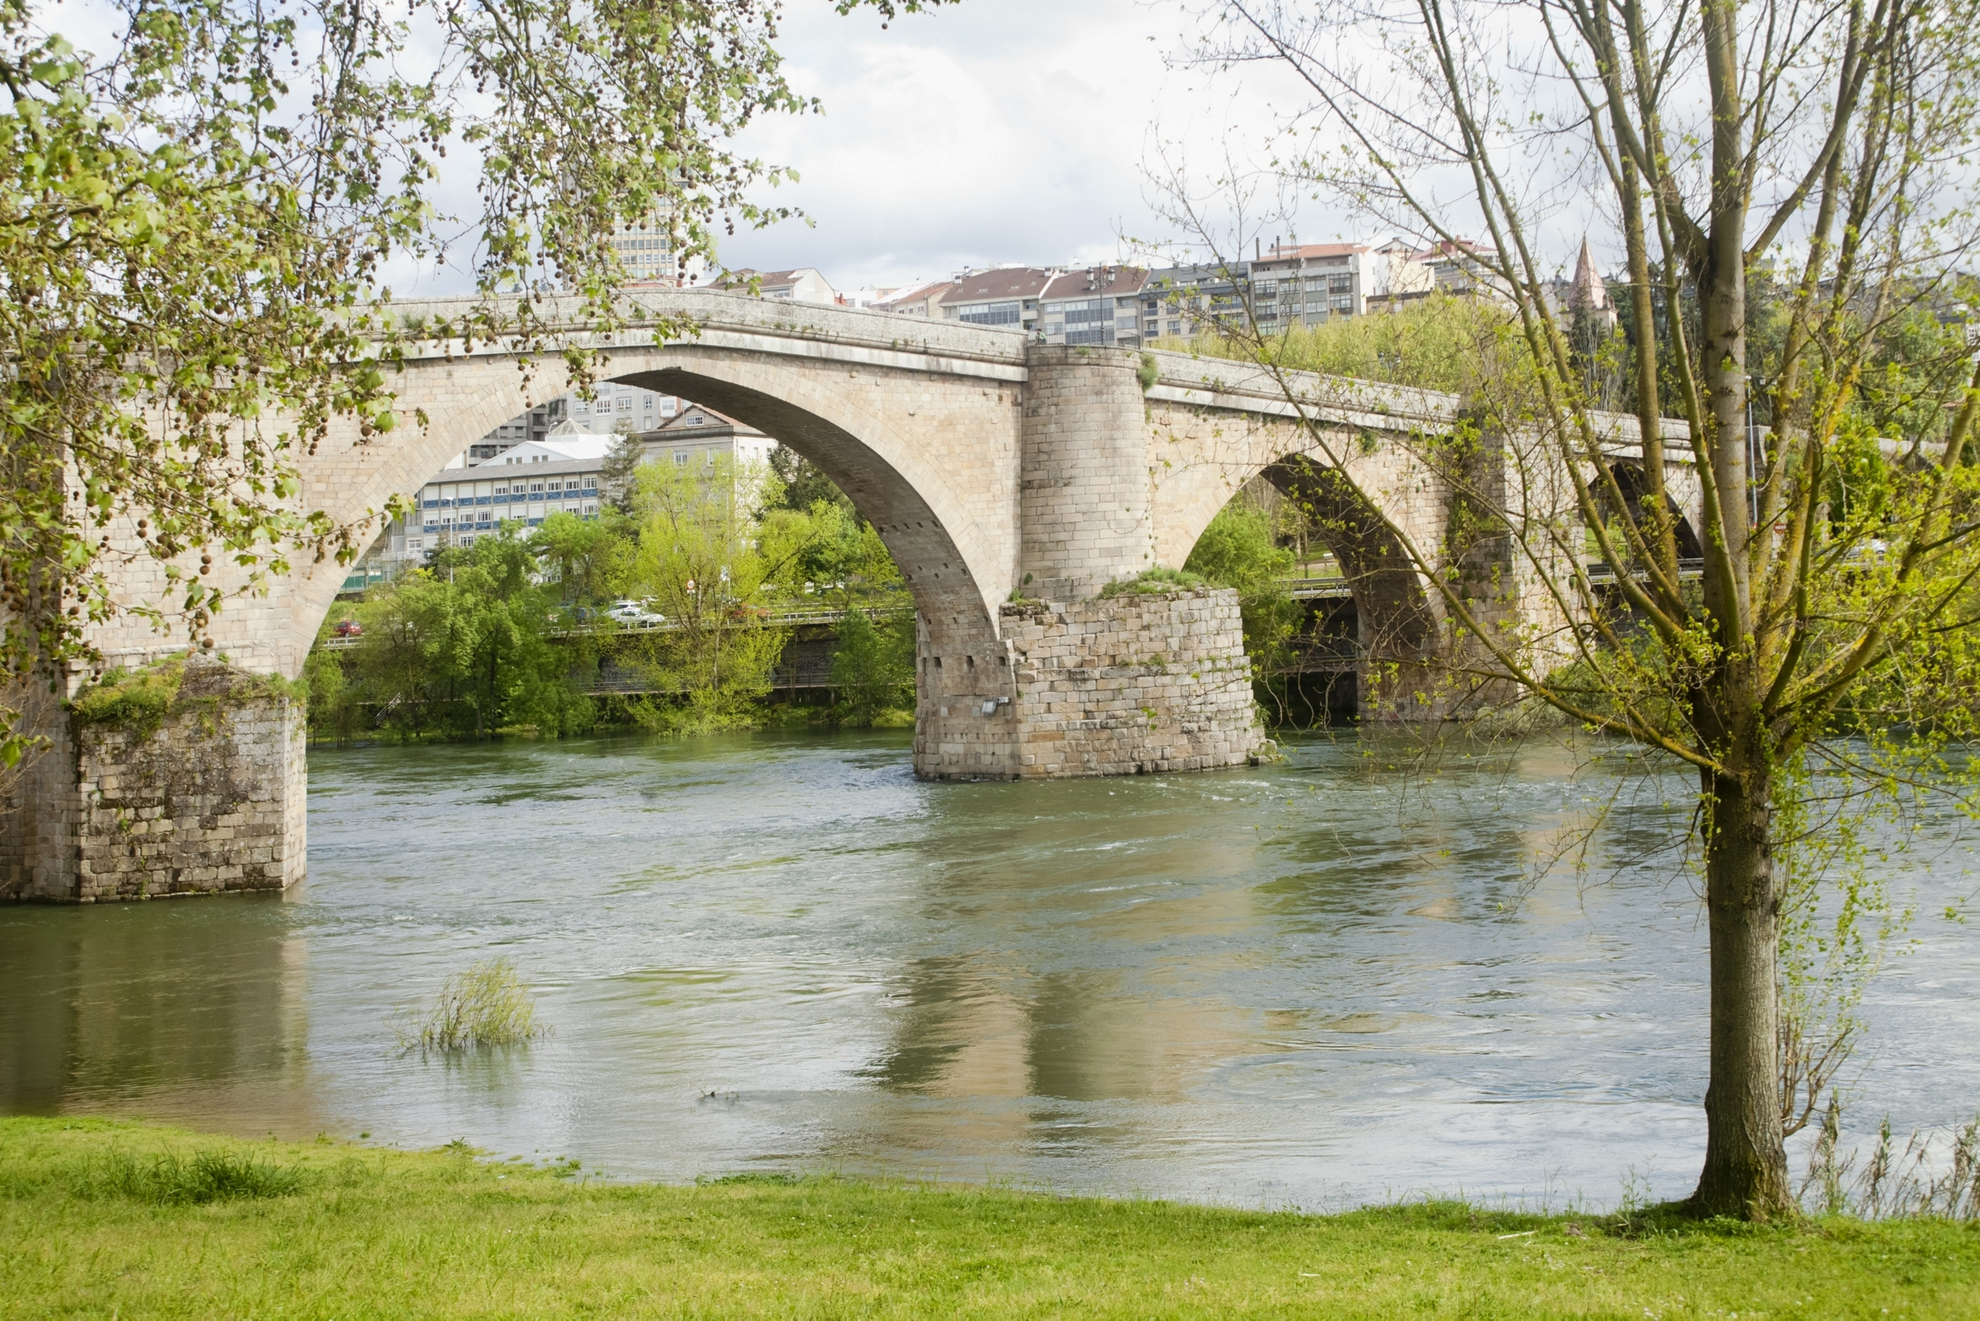 Side view of ancient stone arch bridge in Ourense, Galicia, Spain over river Miño.